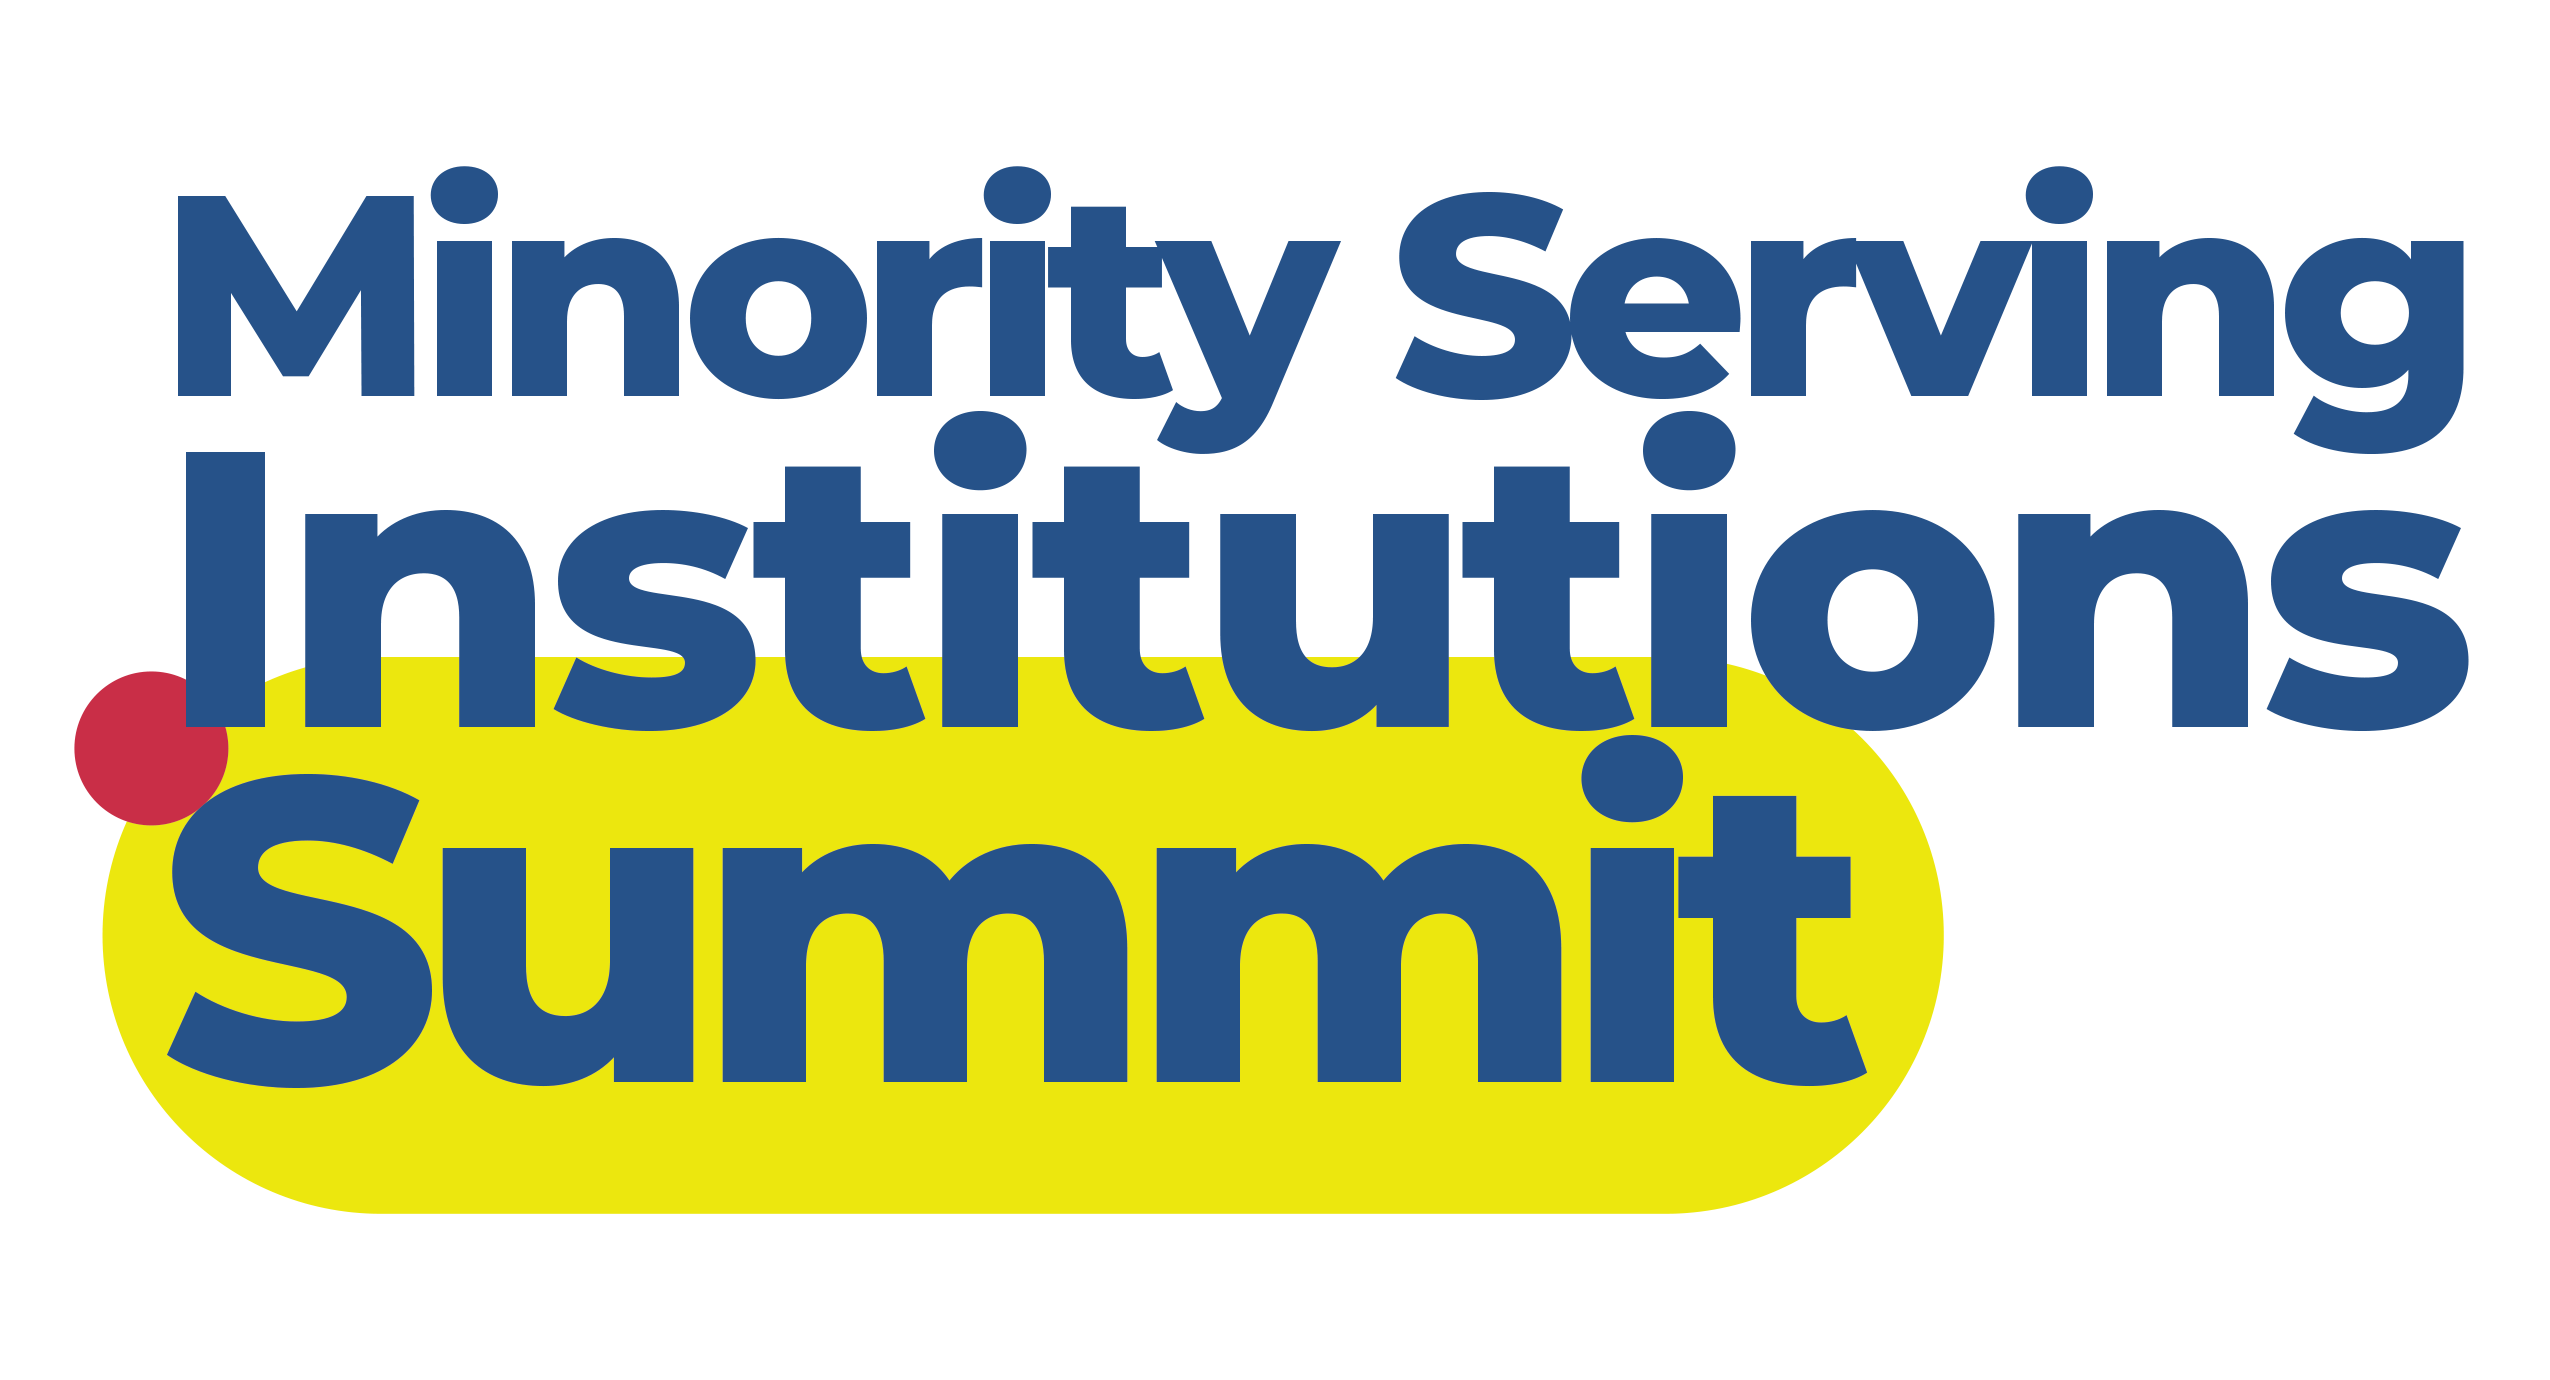 The Minority Serving Institutions (MSI) Summit